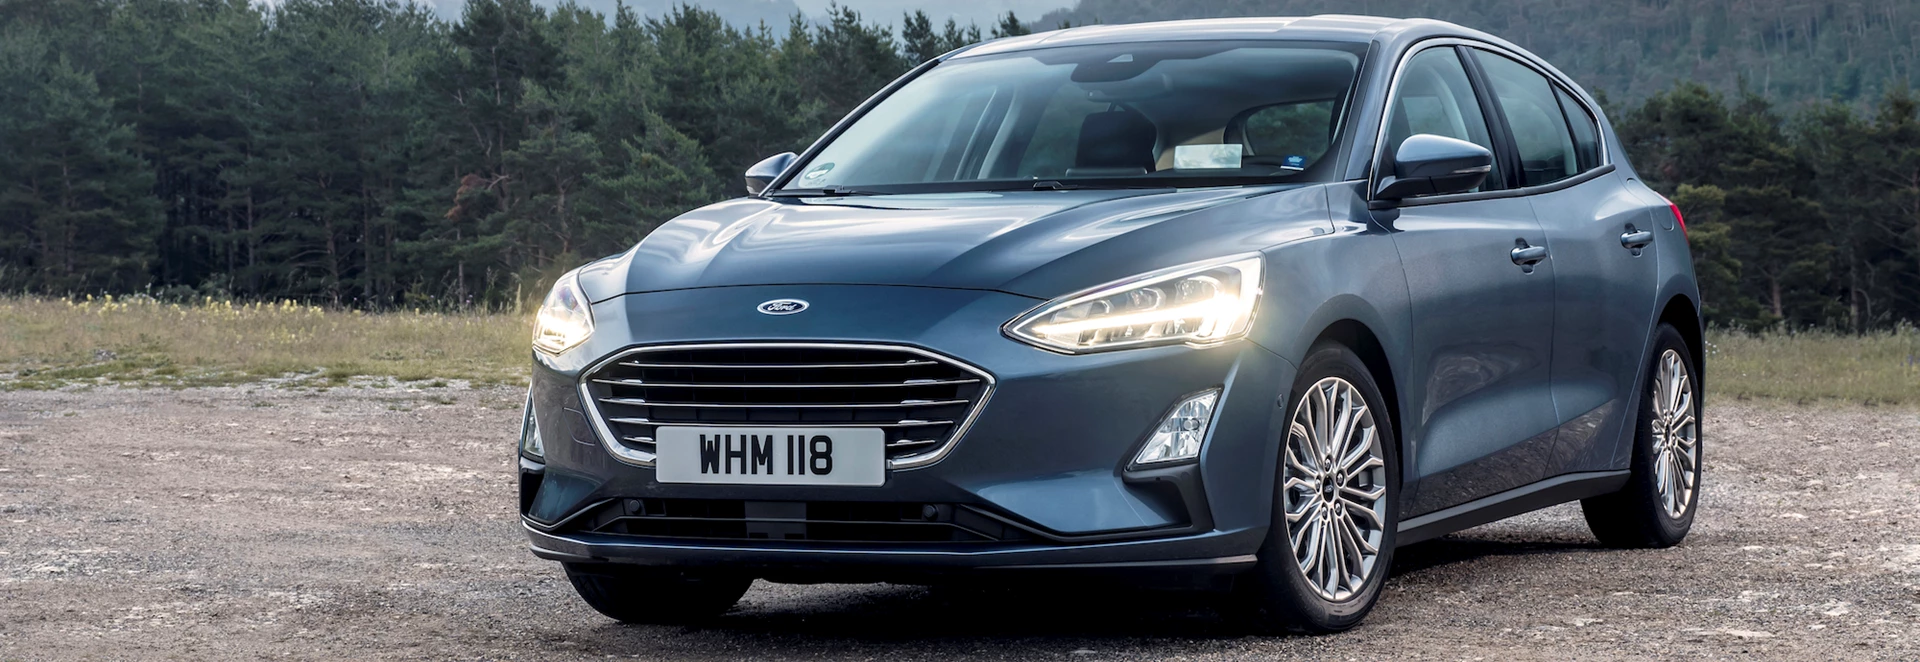 Five reasons why you should test drive the new Ford Focus